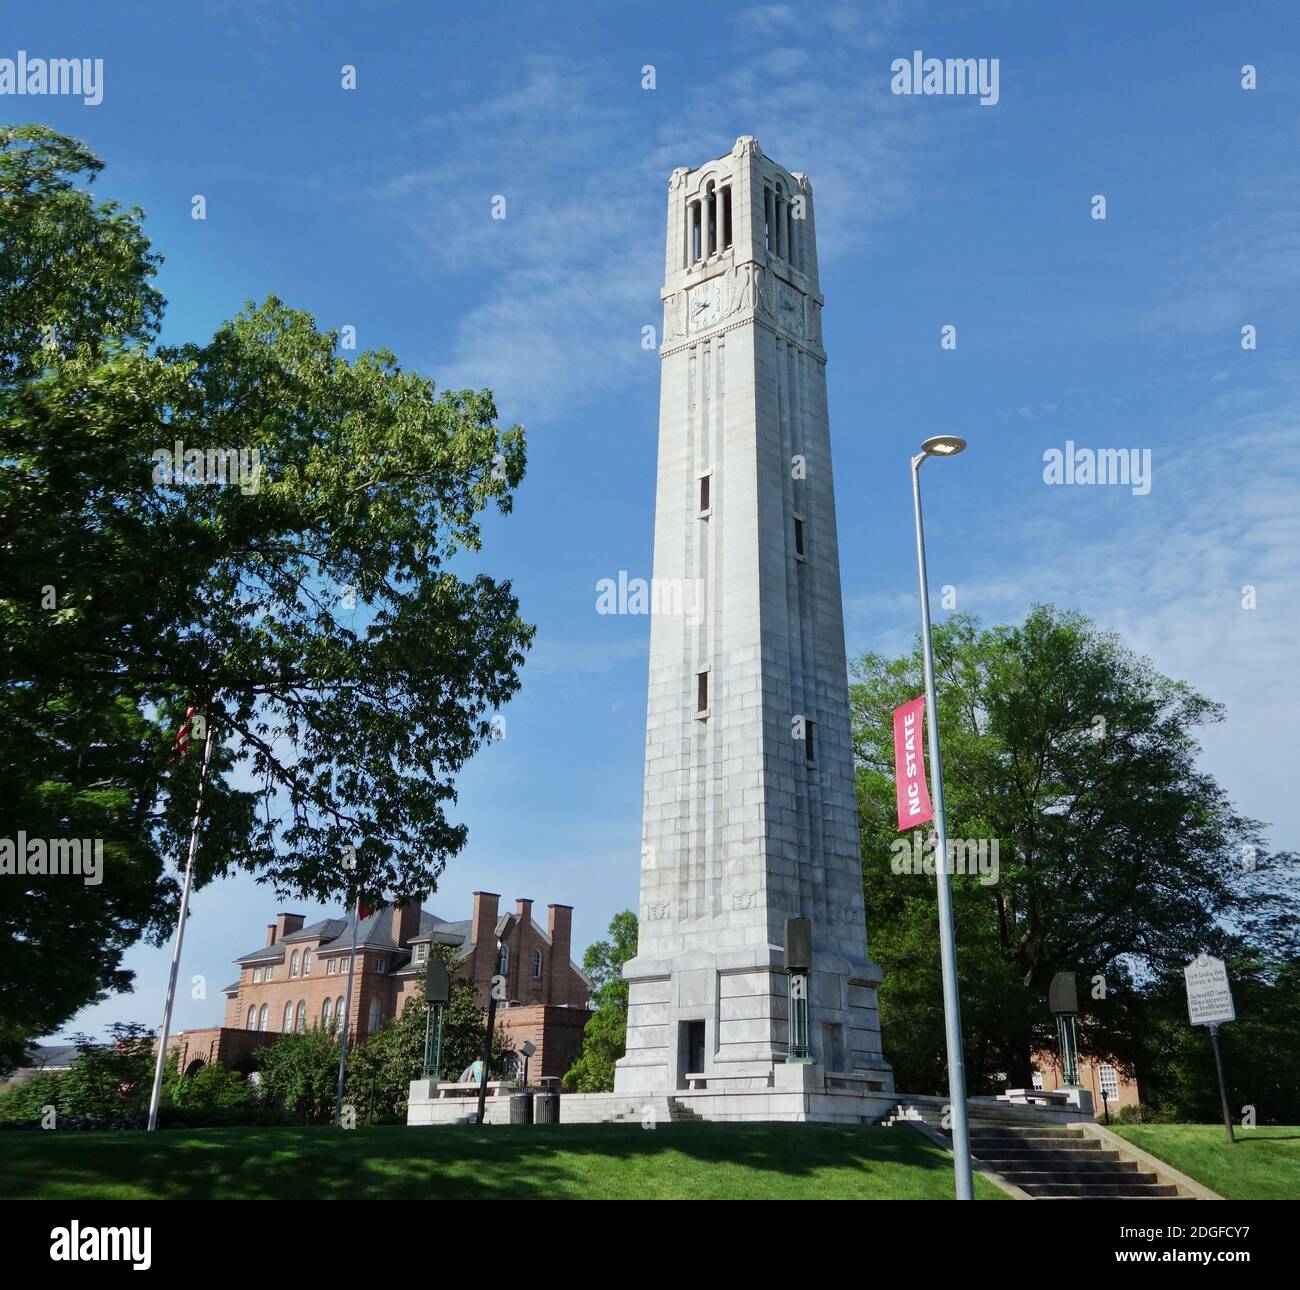 The bell tower on the NC State campus in Raleigh Stock Photo